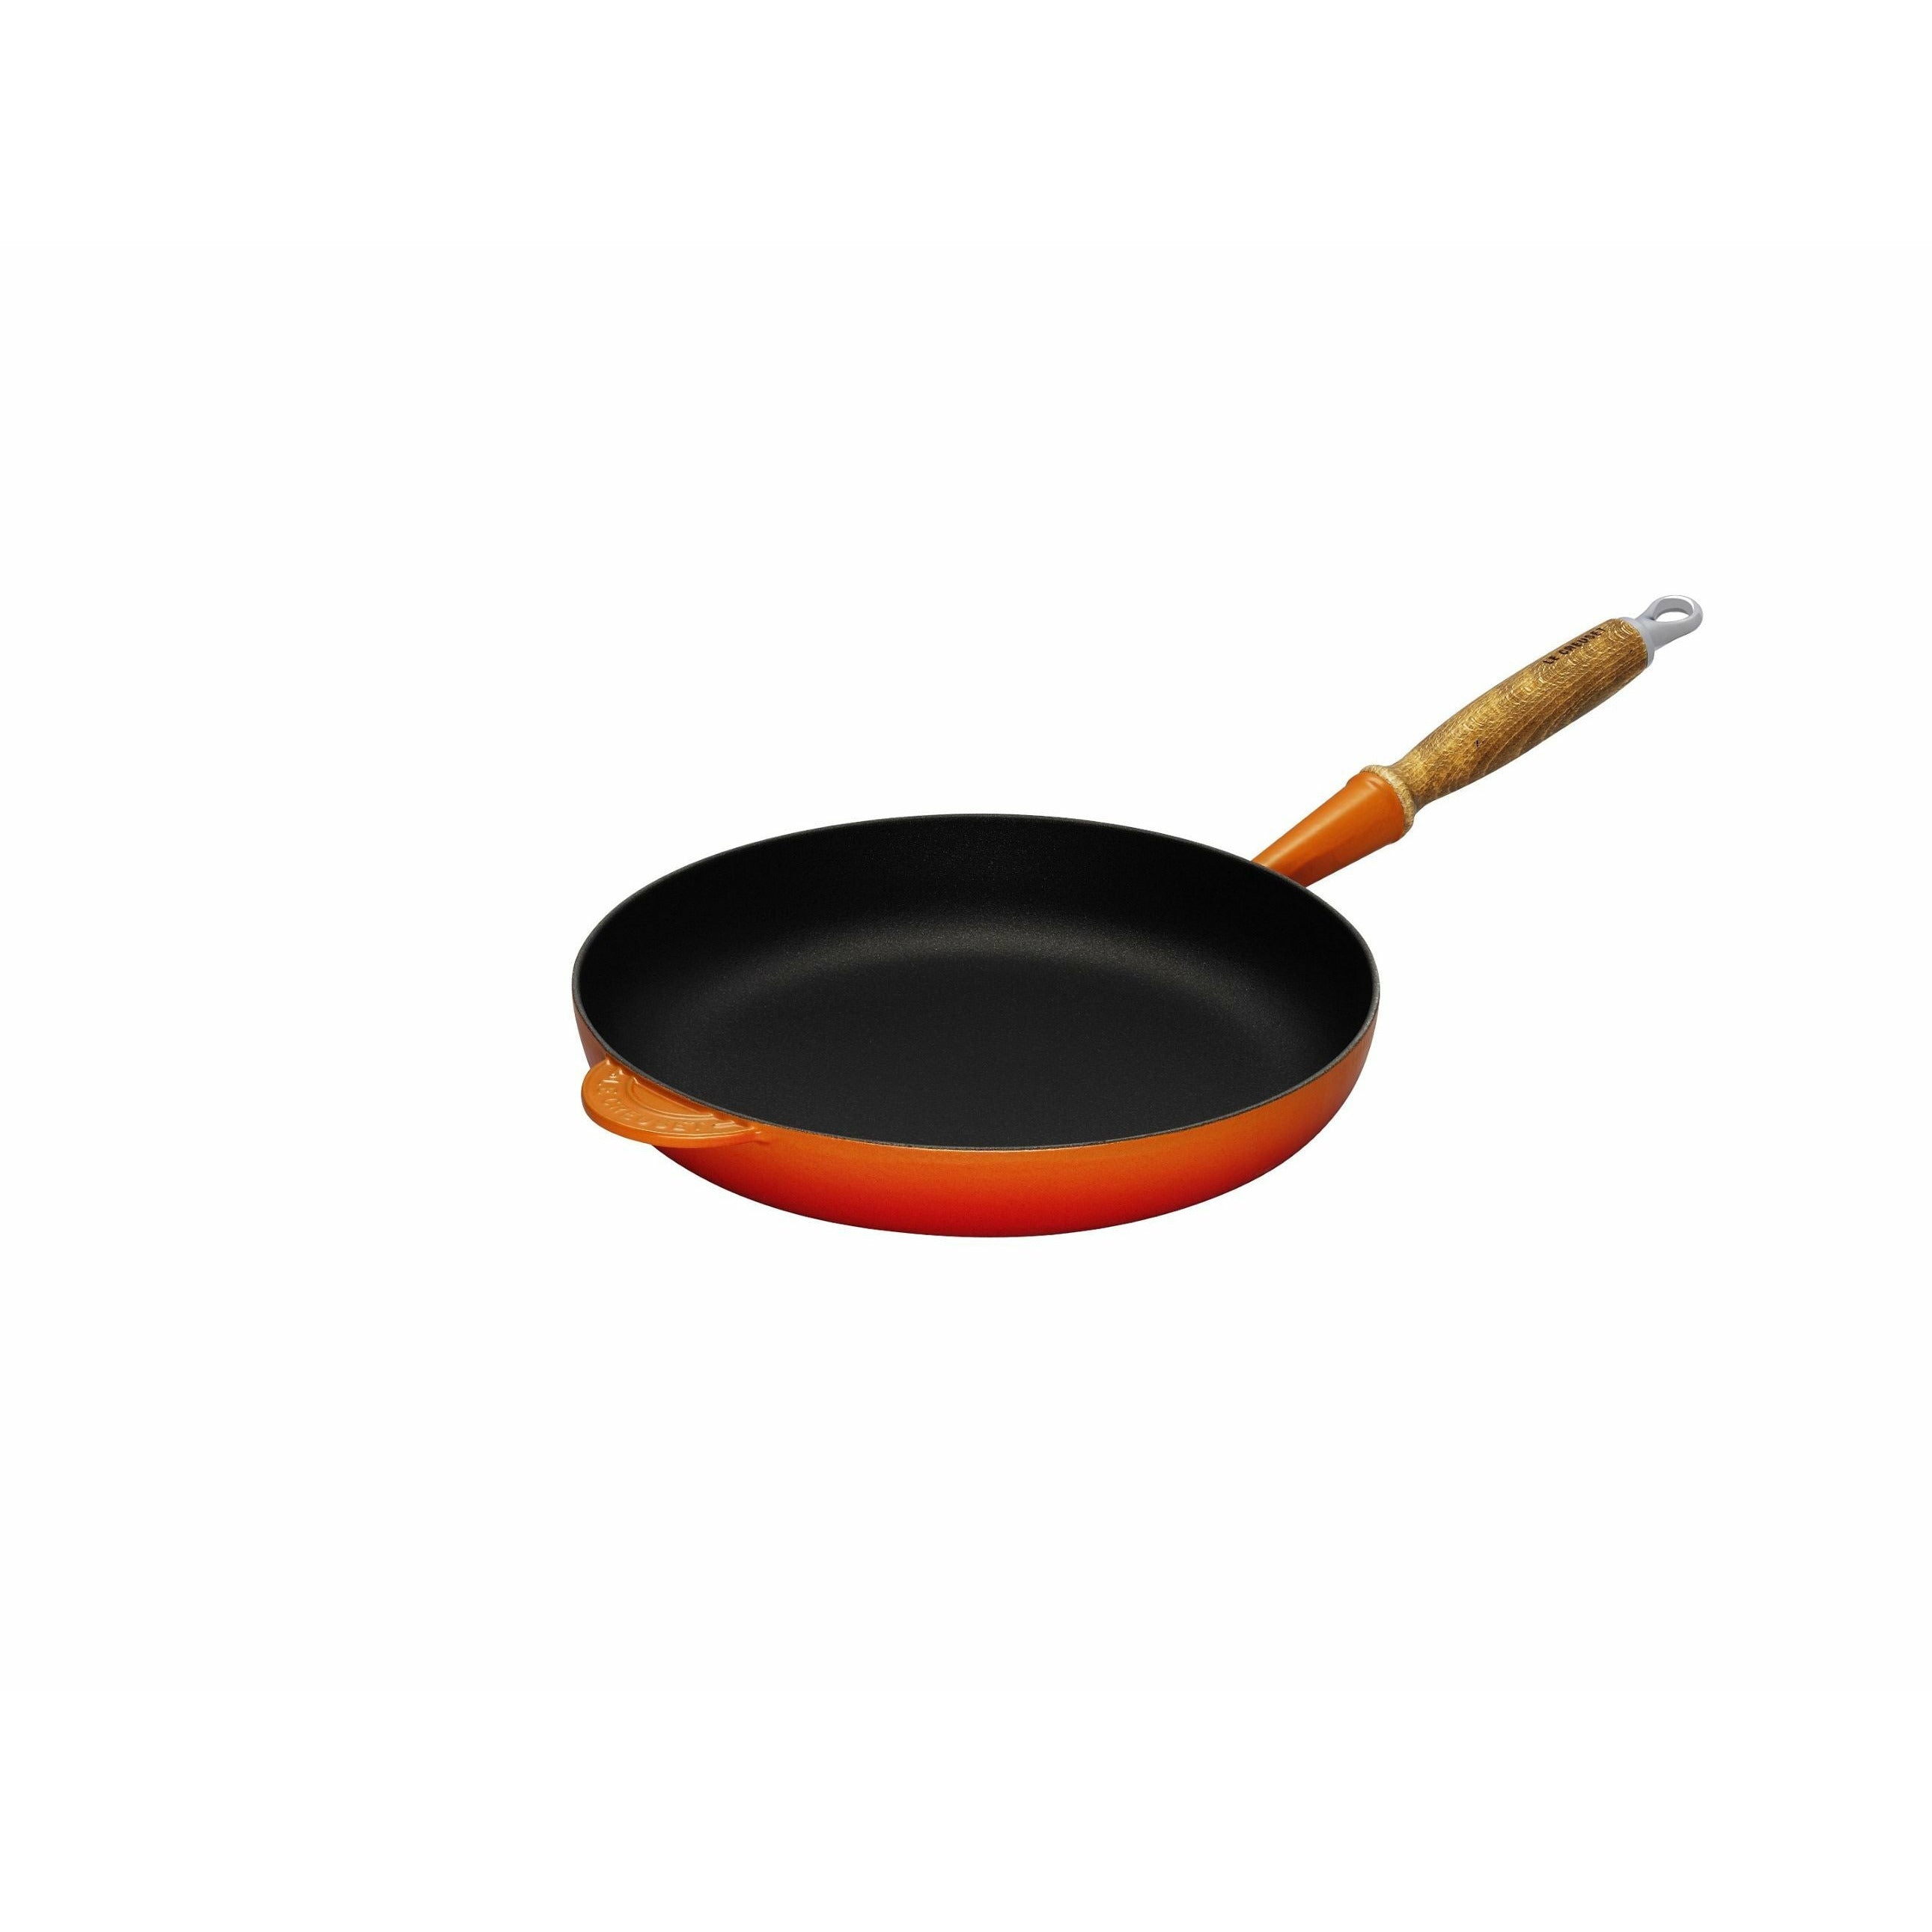 Le Creuset Tradition Frying Pan With Wooden Handle 24 Cm, Oven Red